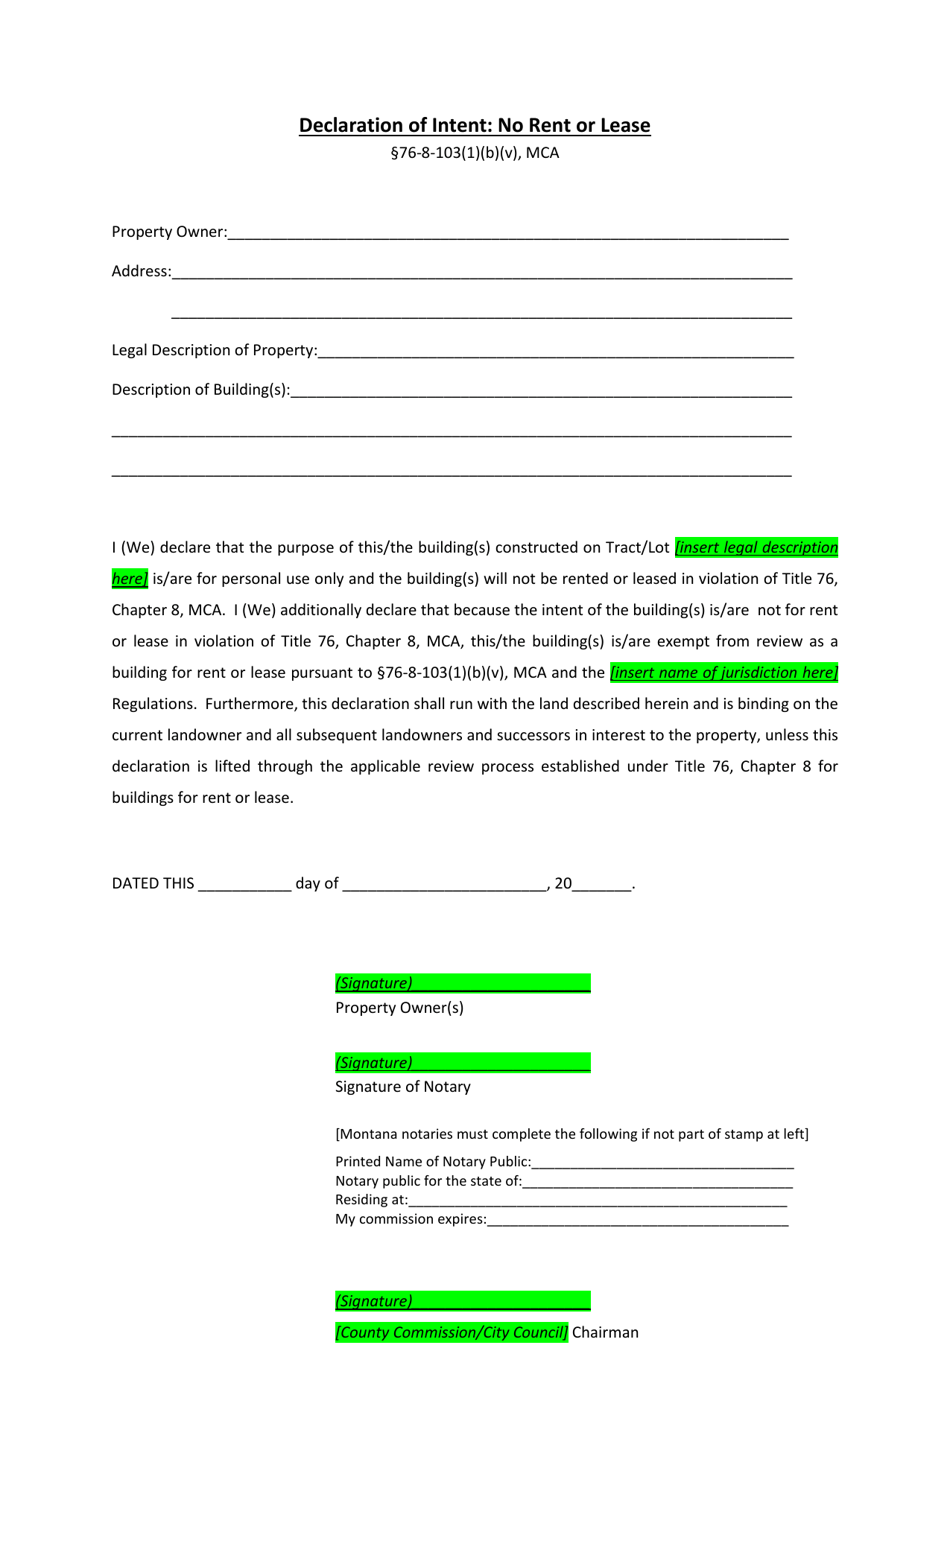 Declaration of Intent: No Rent or Lease - Montana, Page 1